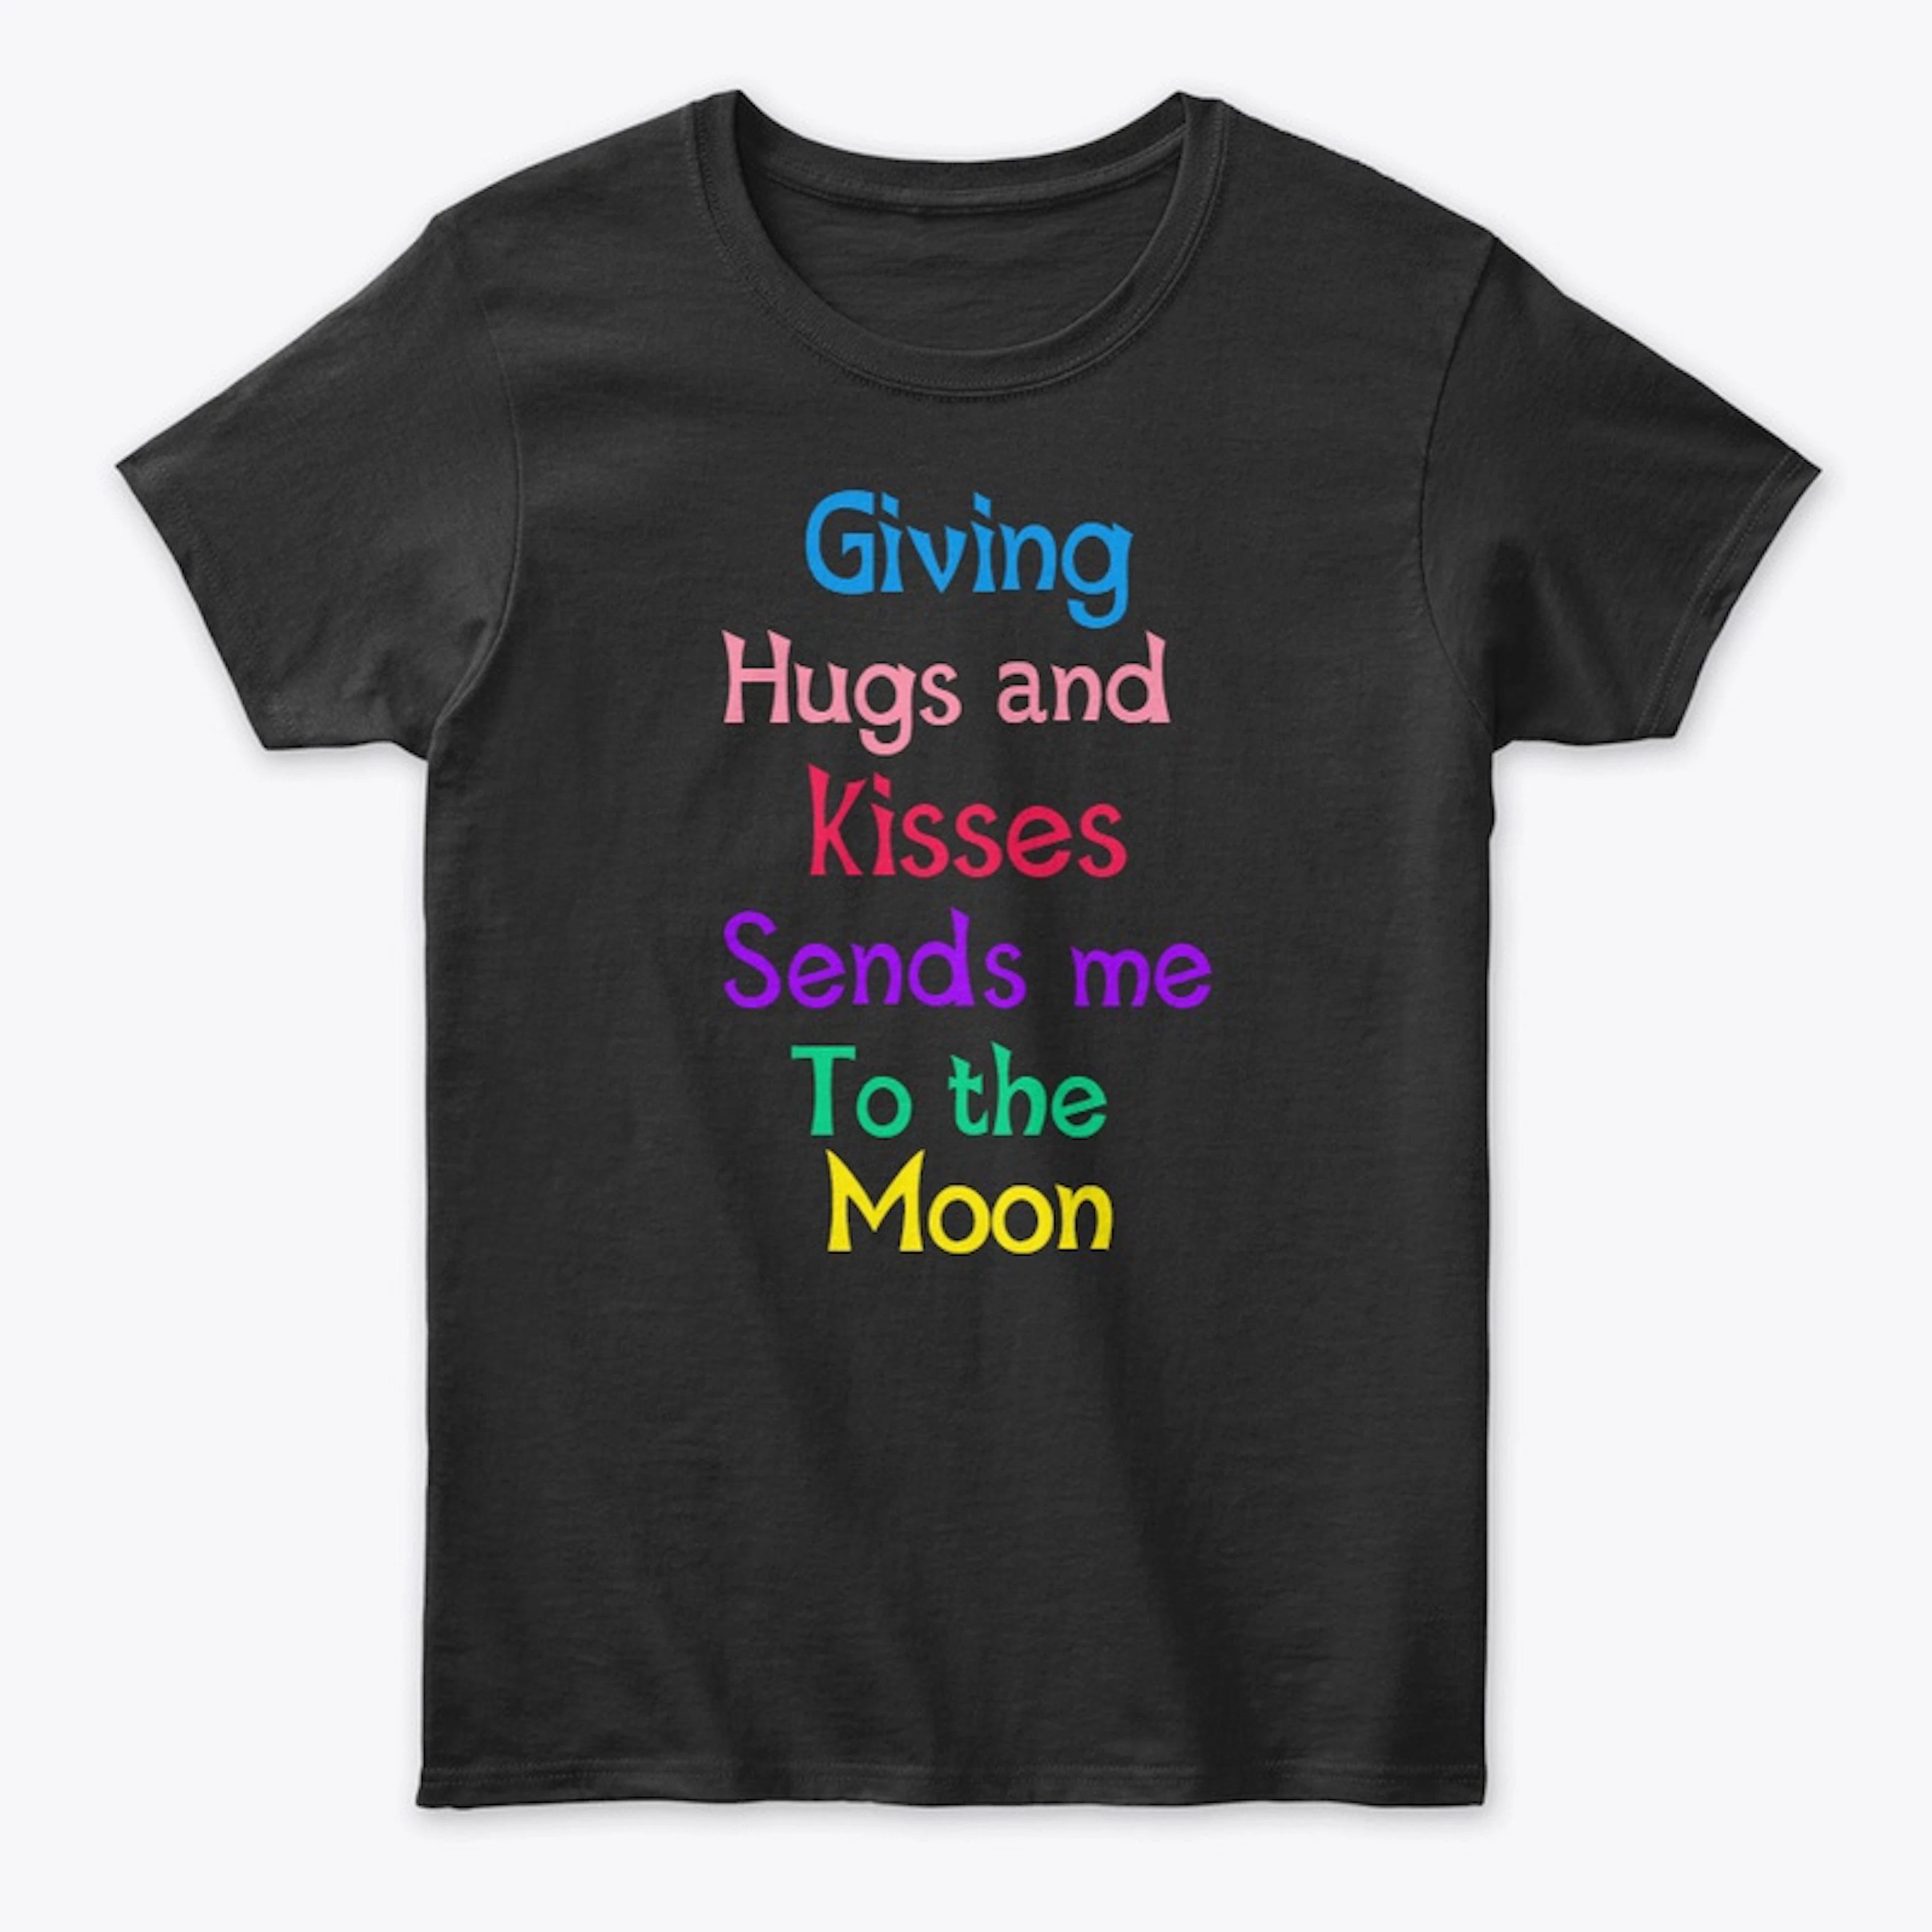 T-shirts with phrases